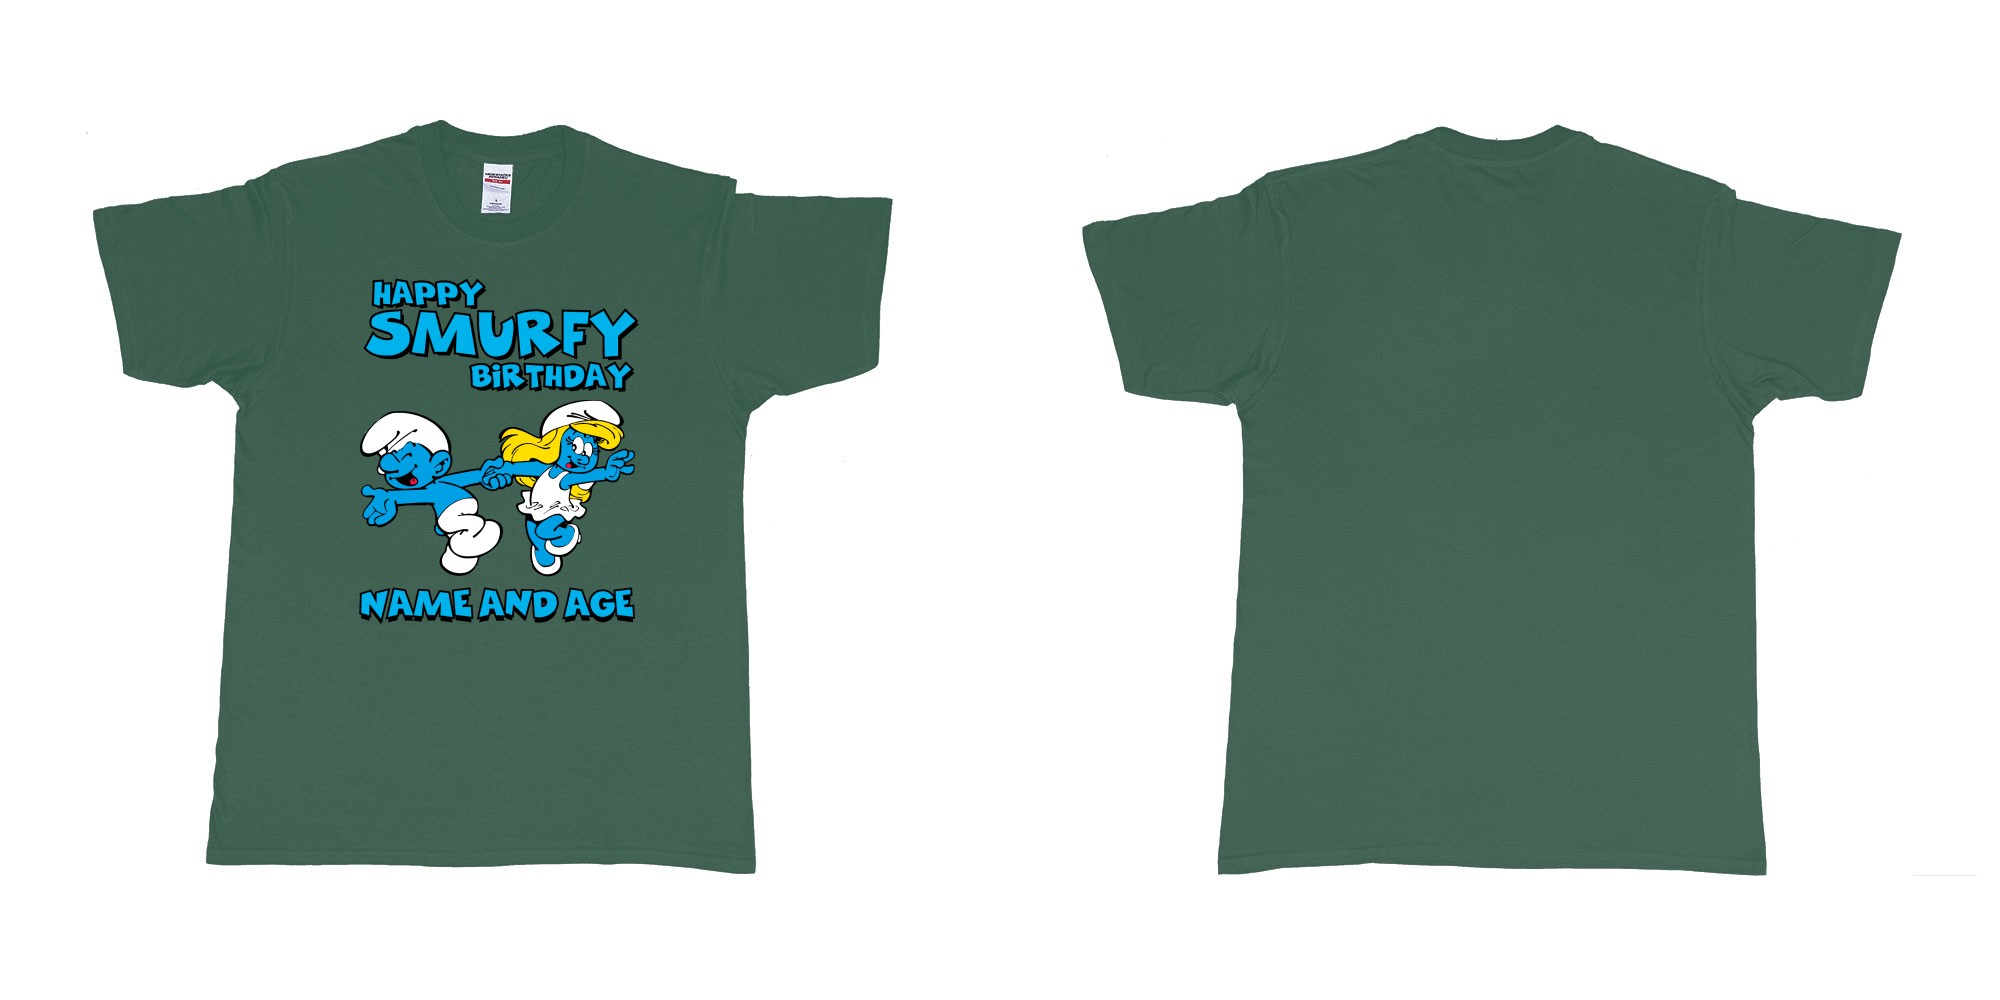 Custom tshirt design happy smurfy birthday in fabric color forest-green choice your own text made in Bali by The Pirate Way